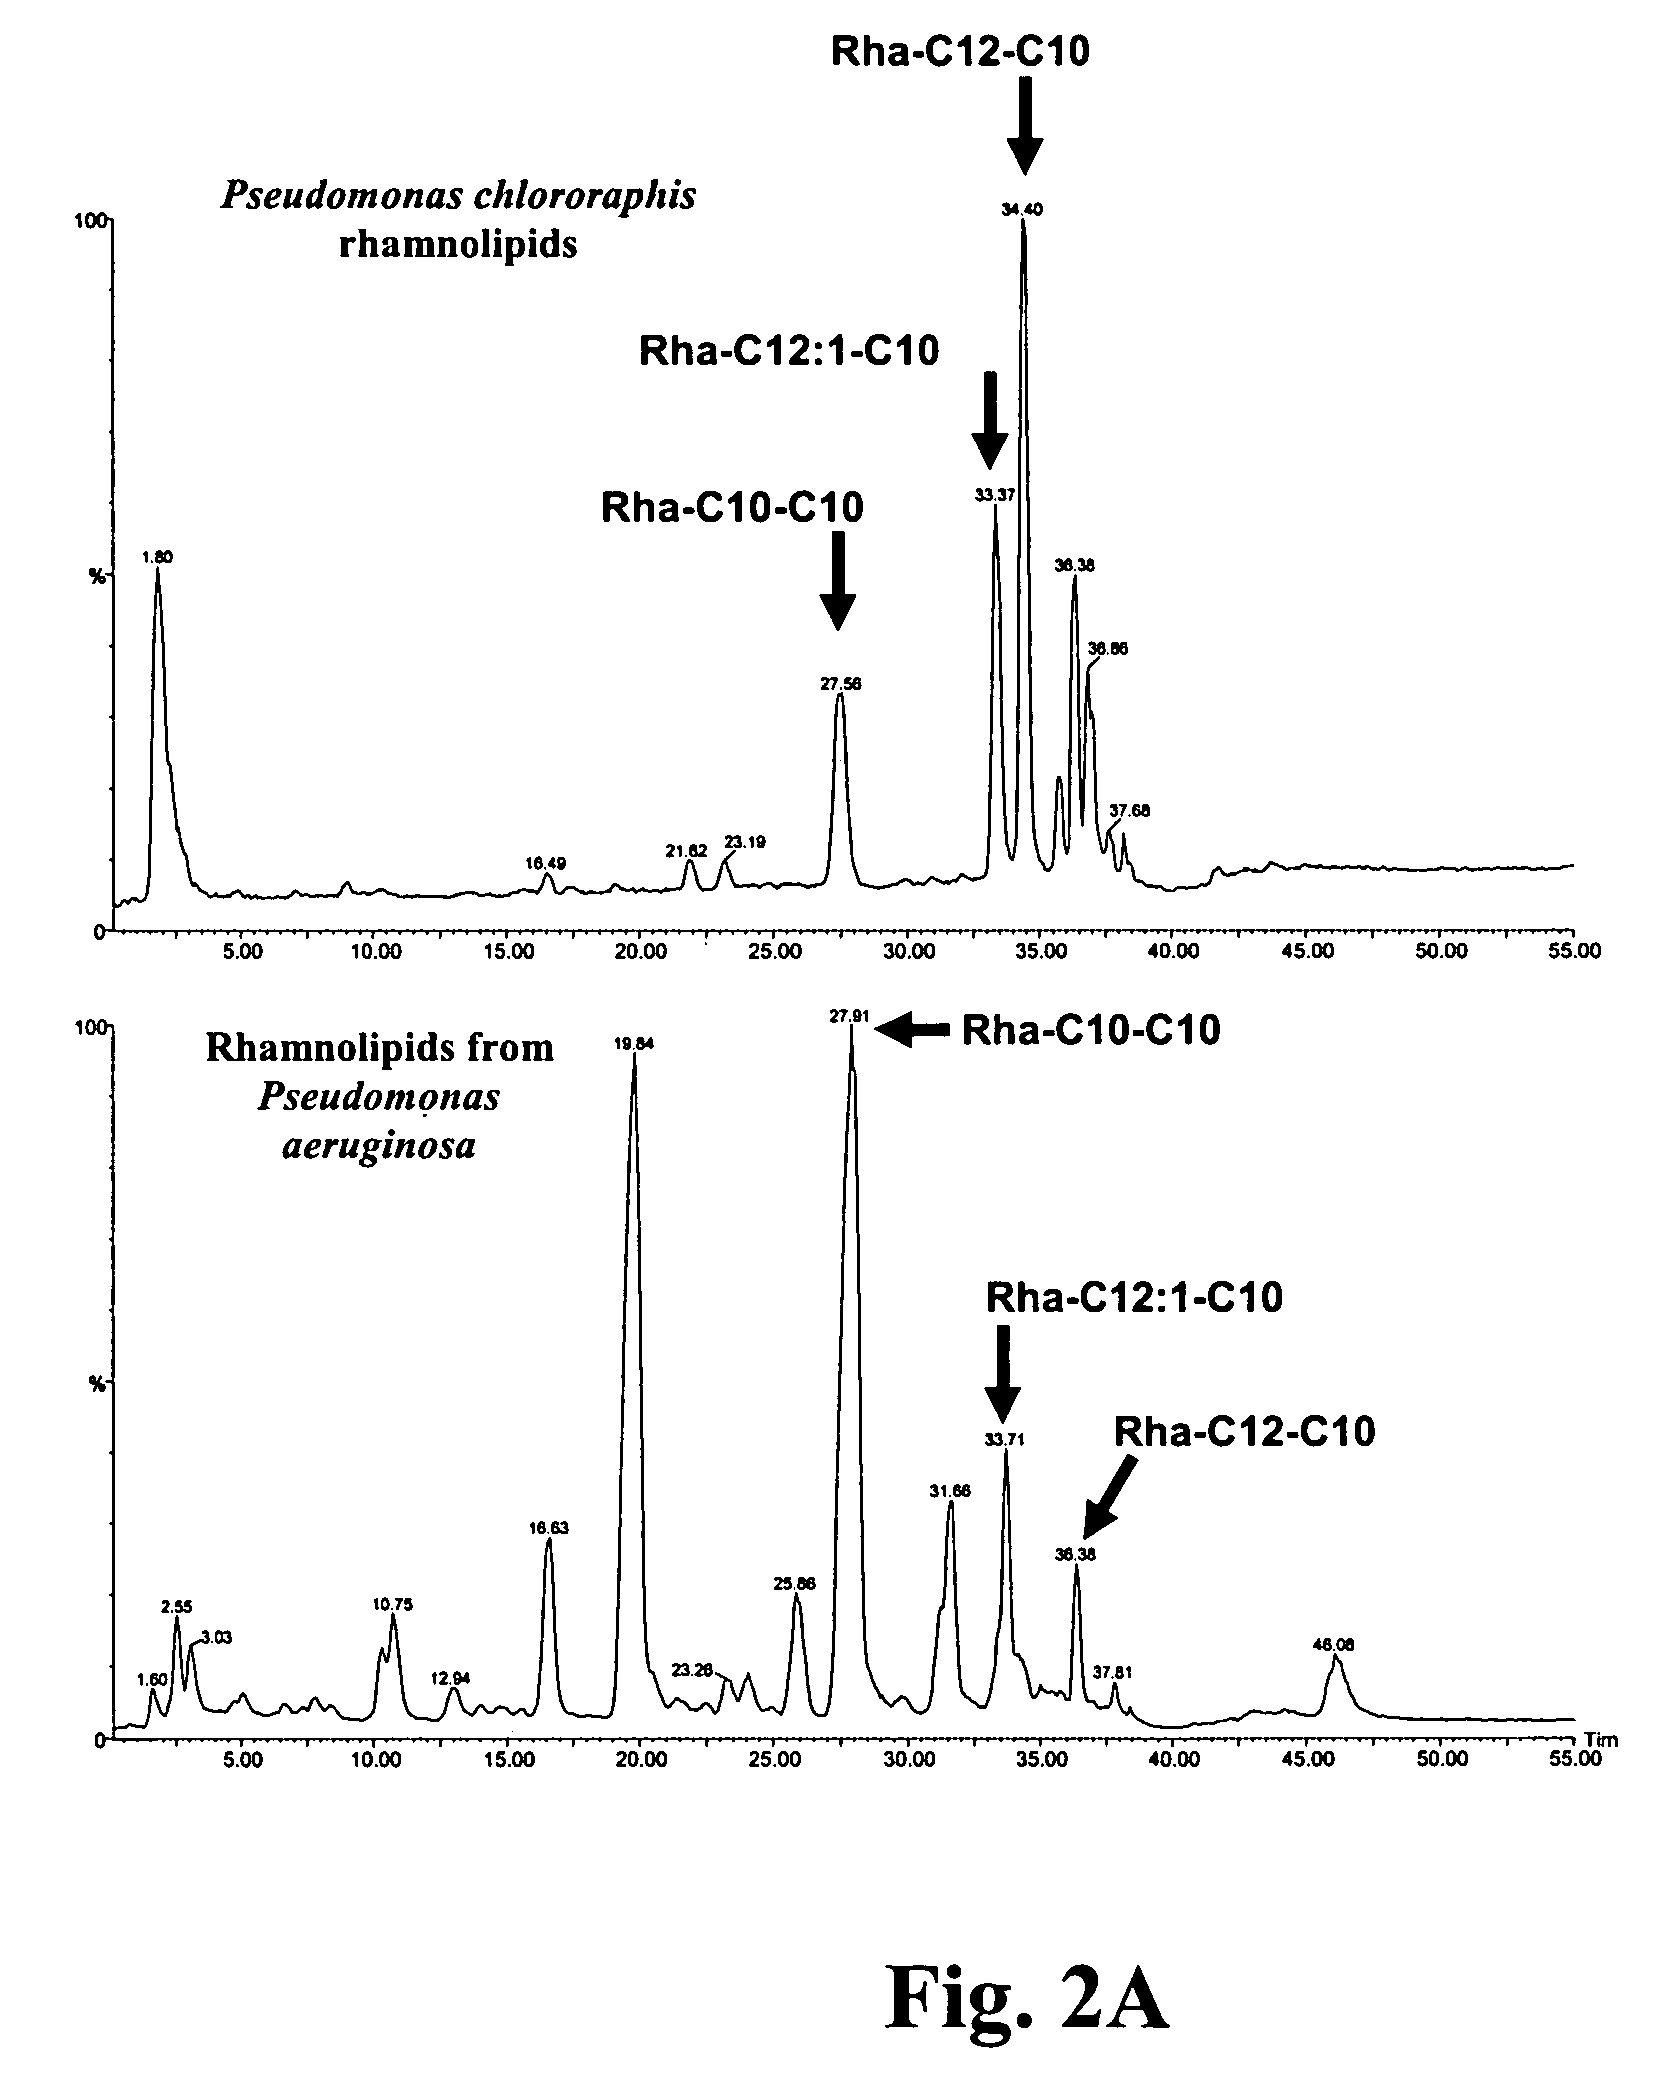 Processes for the production of rhamnolipids